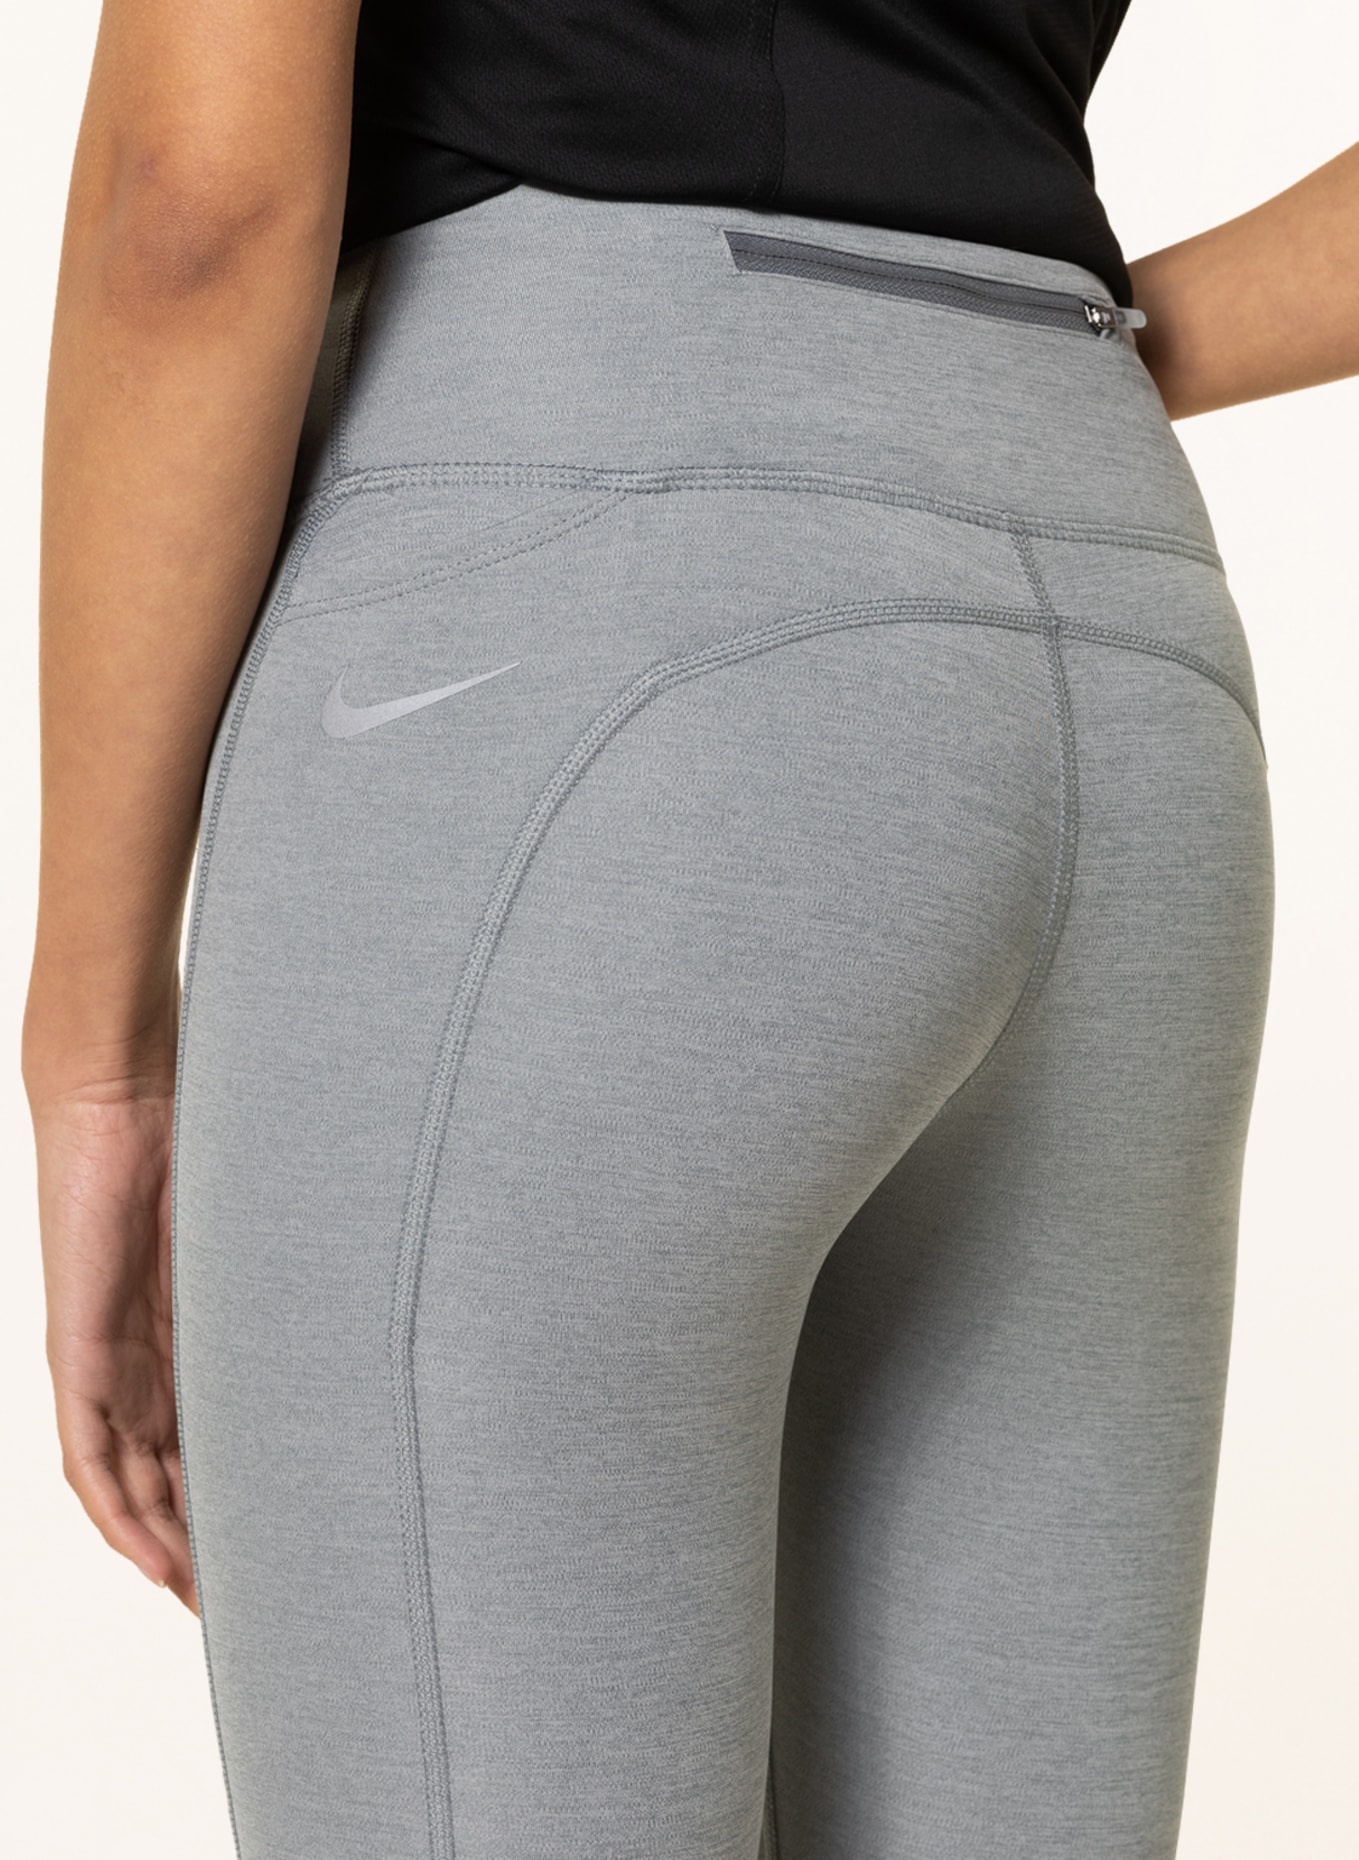 Nike Running tights EPIC FAST with mesh in light gray